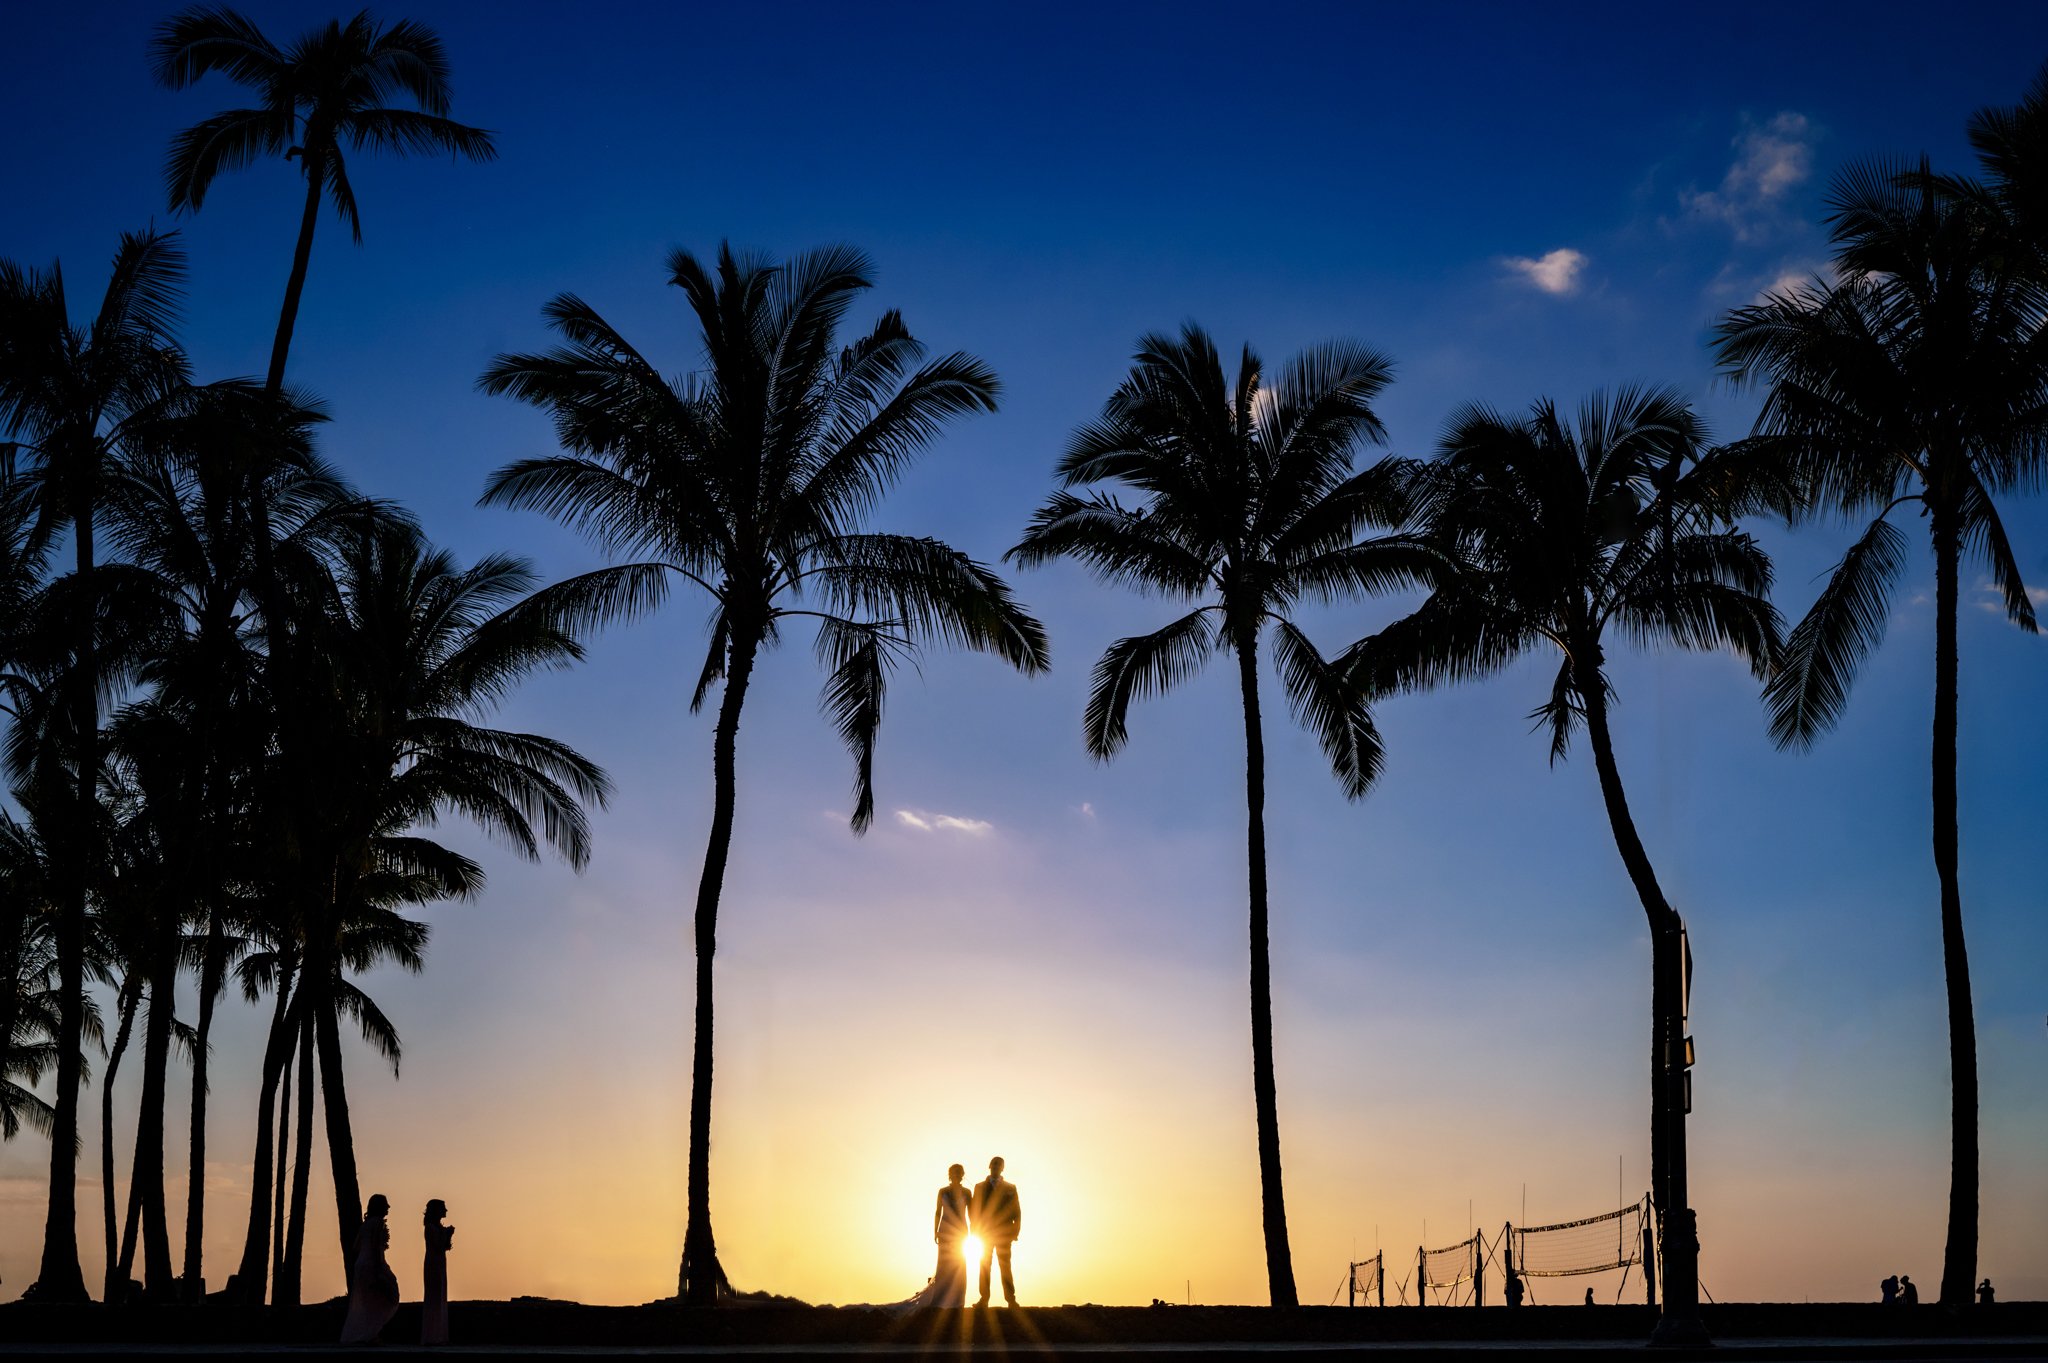 a couple silhouetted in front of palm trees at sunset in honolulu hawaii